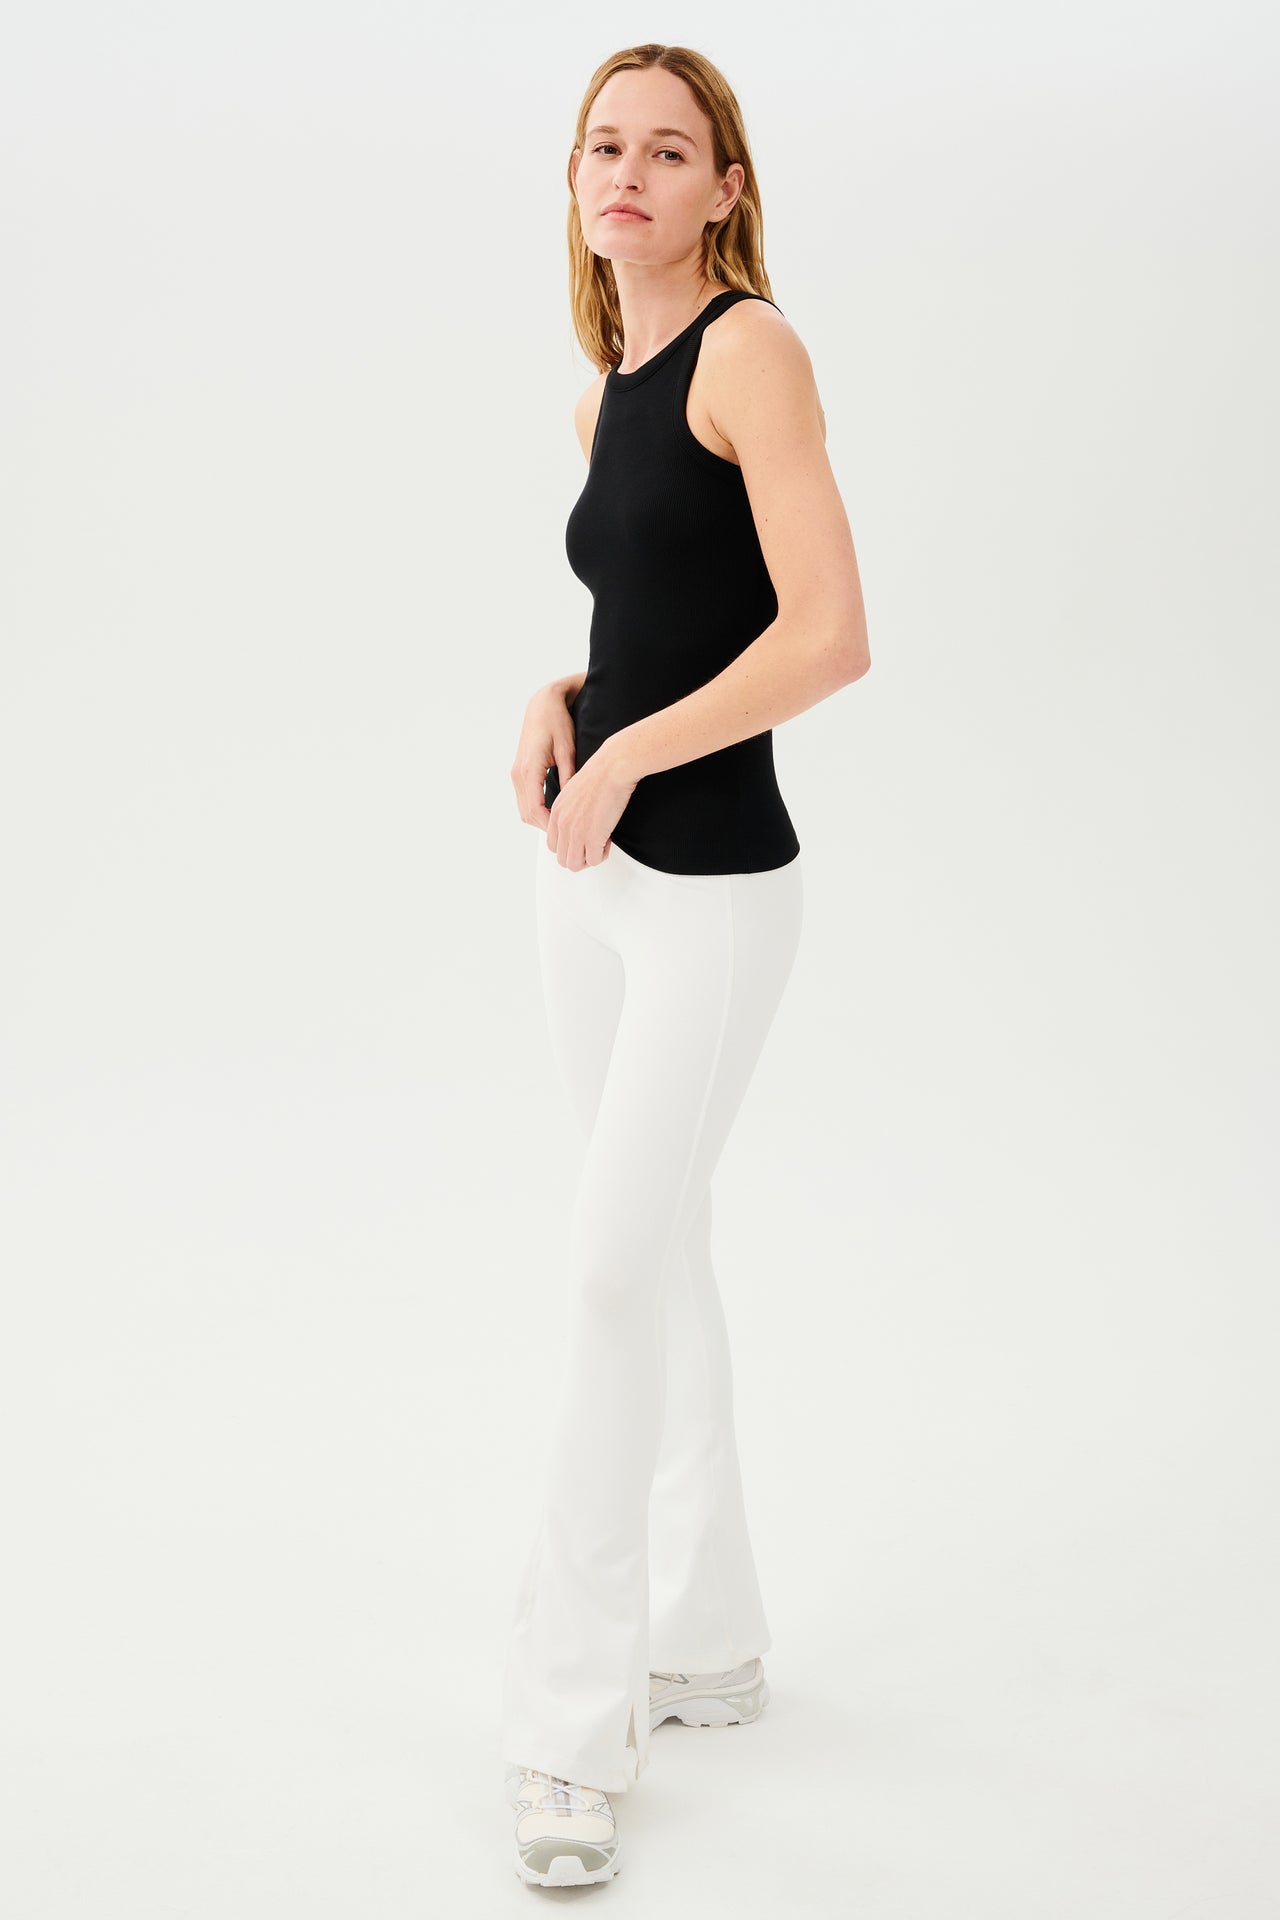 A woman wearing a SPLITS59 Kiki Rib Tank Full Length in Black and white pants, ready for her yoga session.